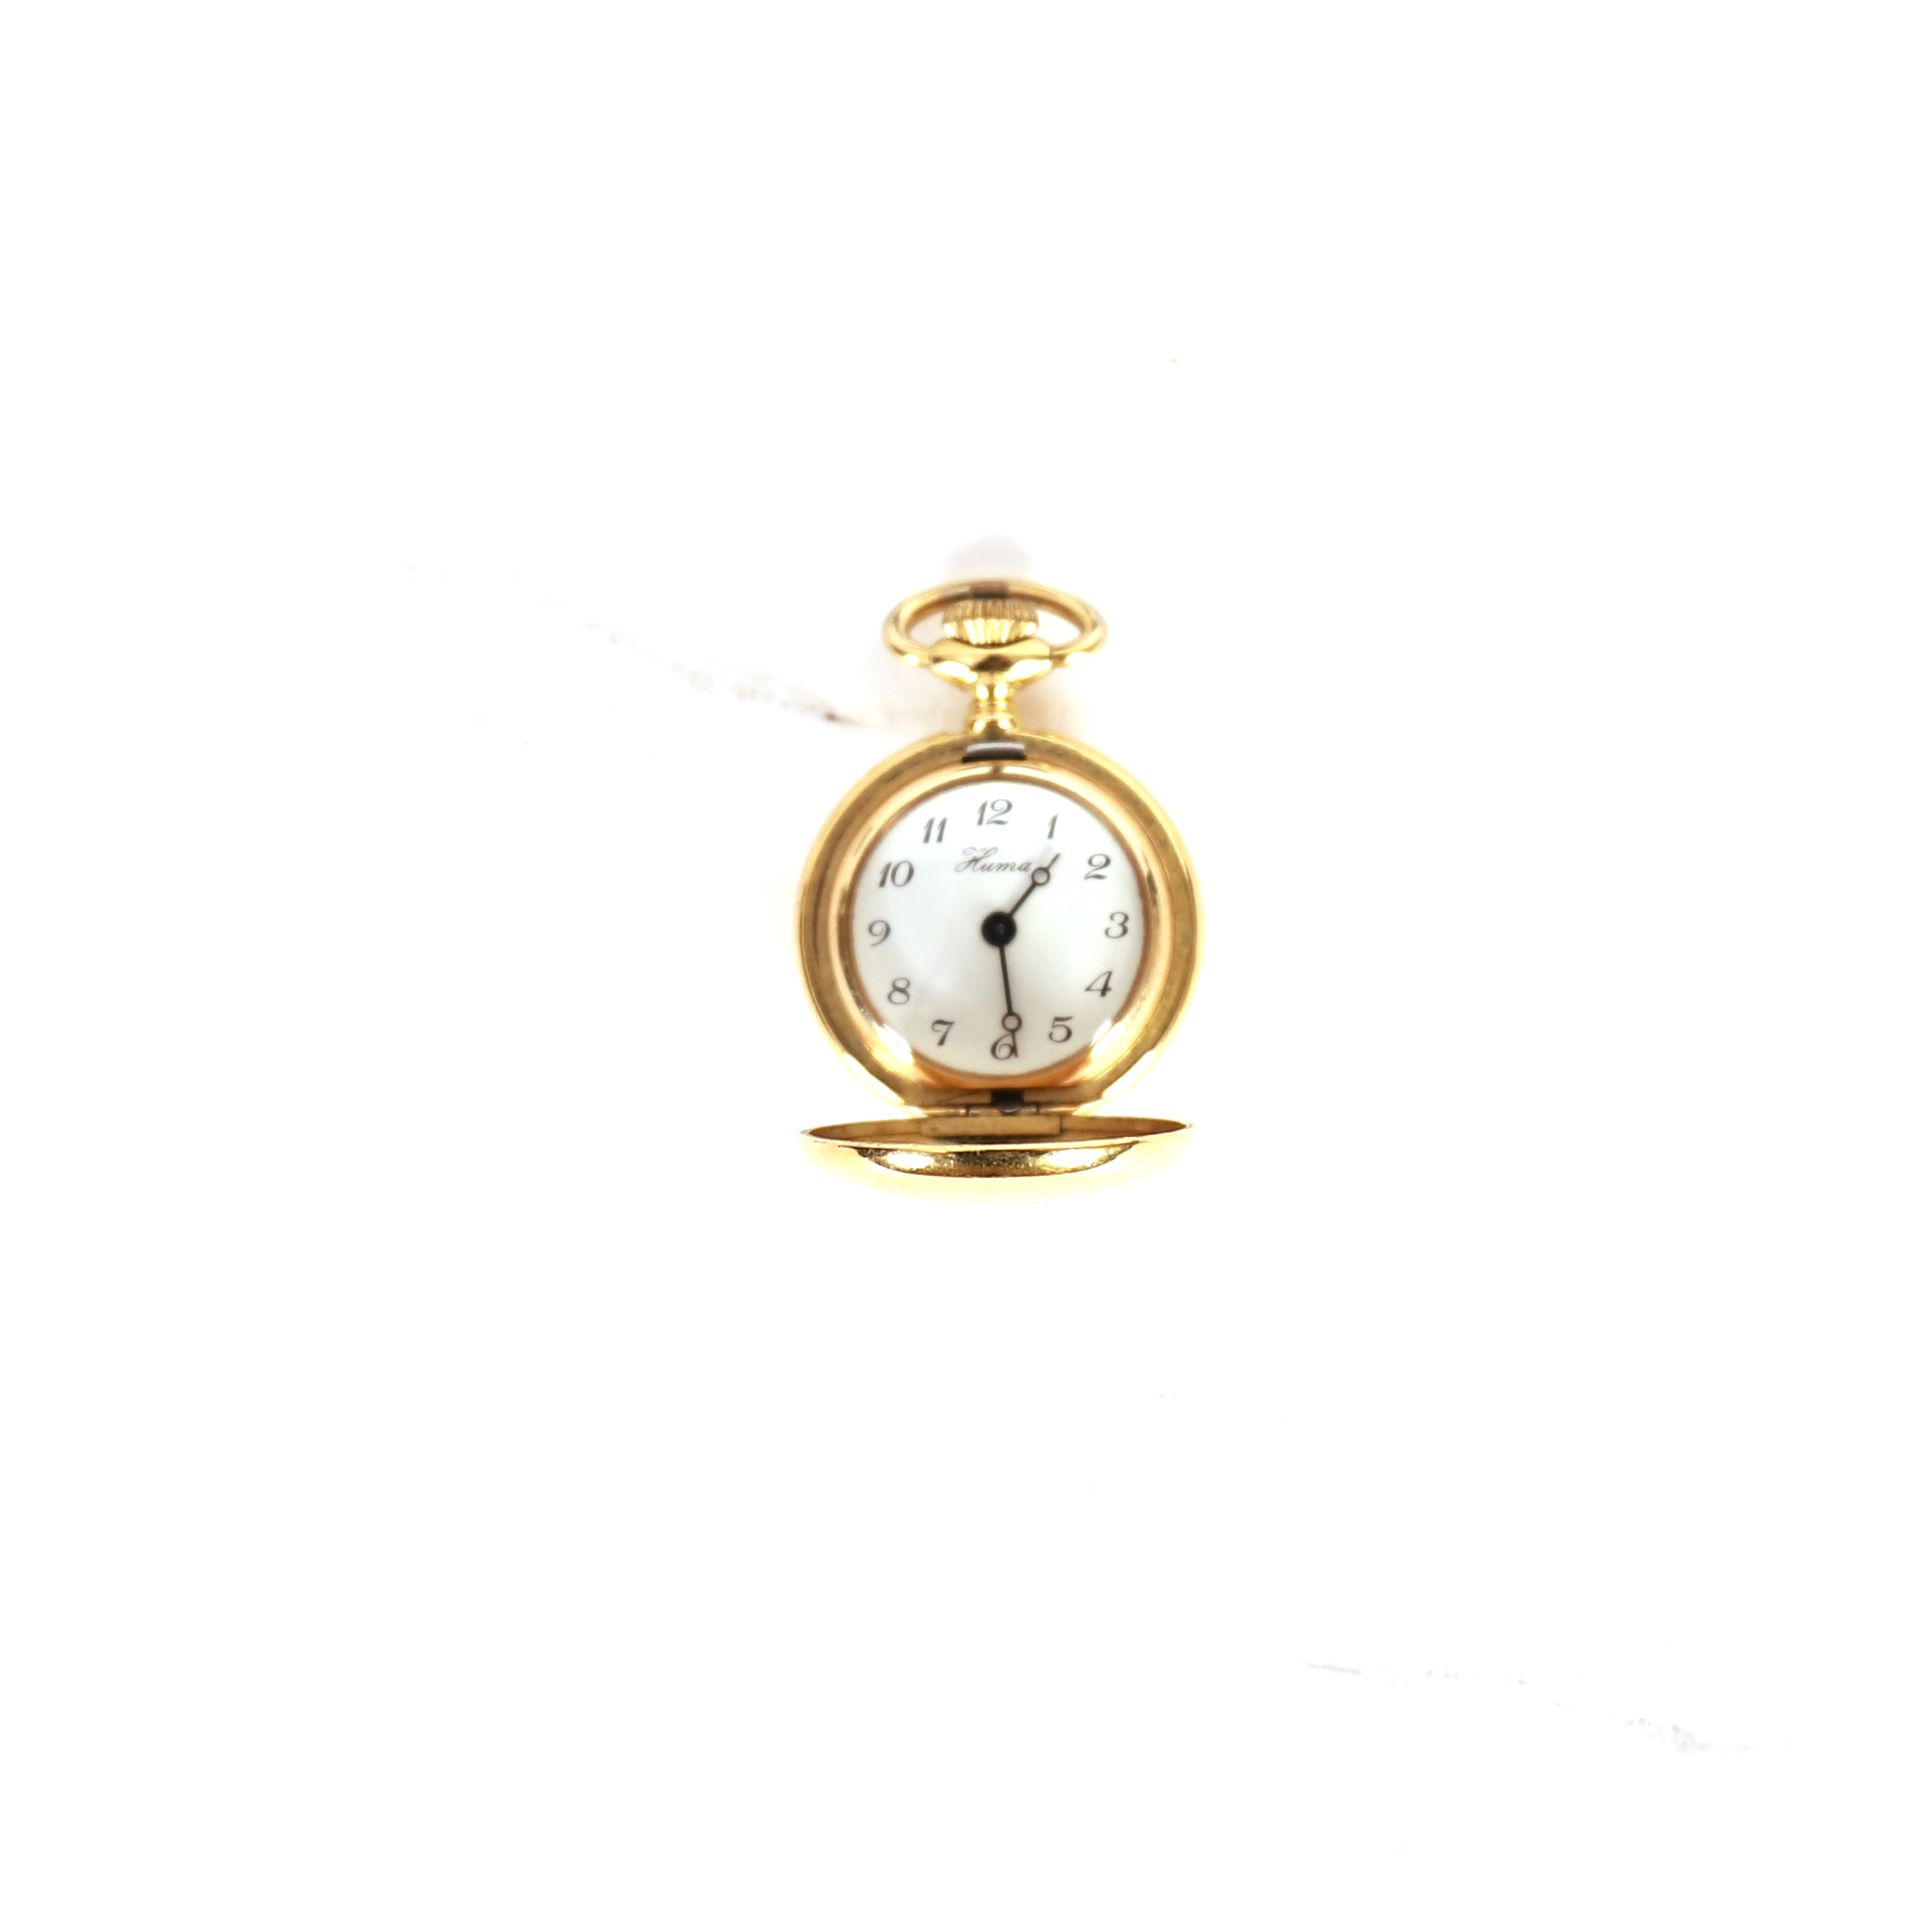 Null SMALL GOLD POCKET WATCH by HUMA

Pb : 19 grs